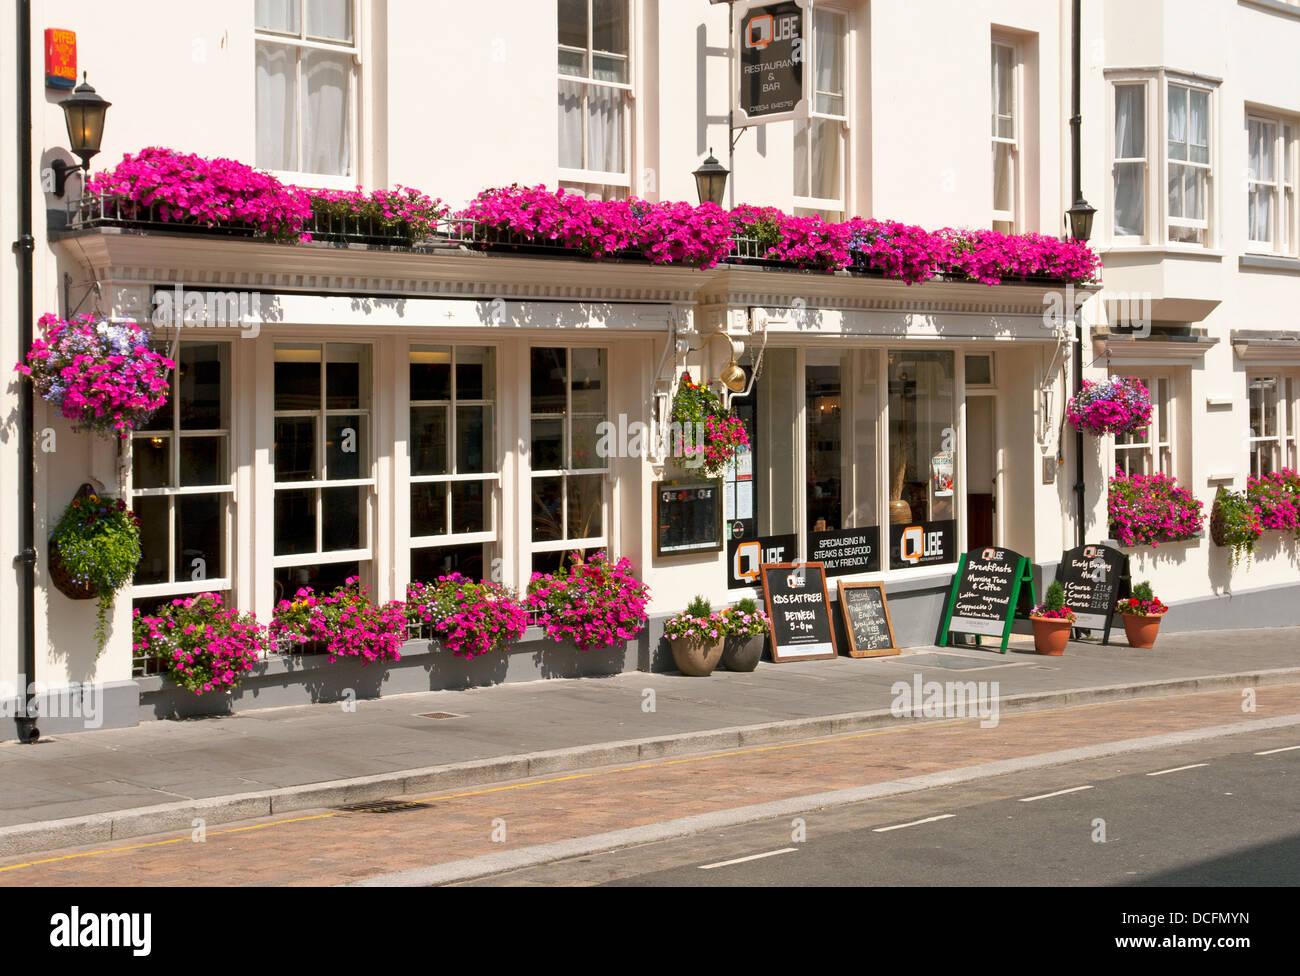 Qube restaurant in Tenby, Pembrokeshire,Wales with colourful flower decoration. Stock Photo